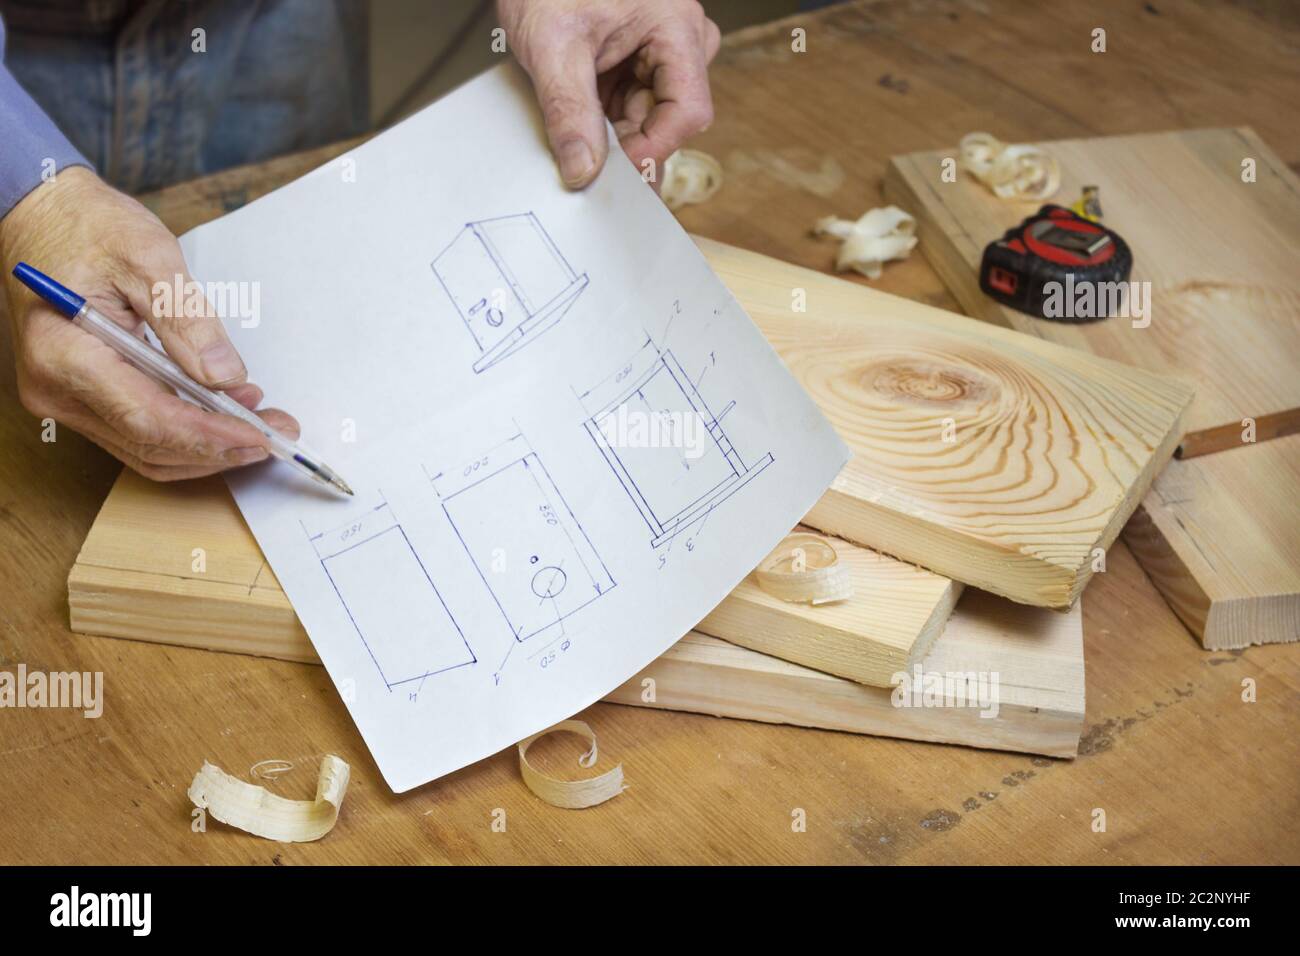 Carpenter is studying the drawing of a birdhouse Stock Photo